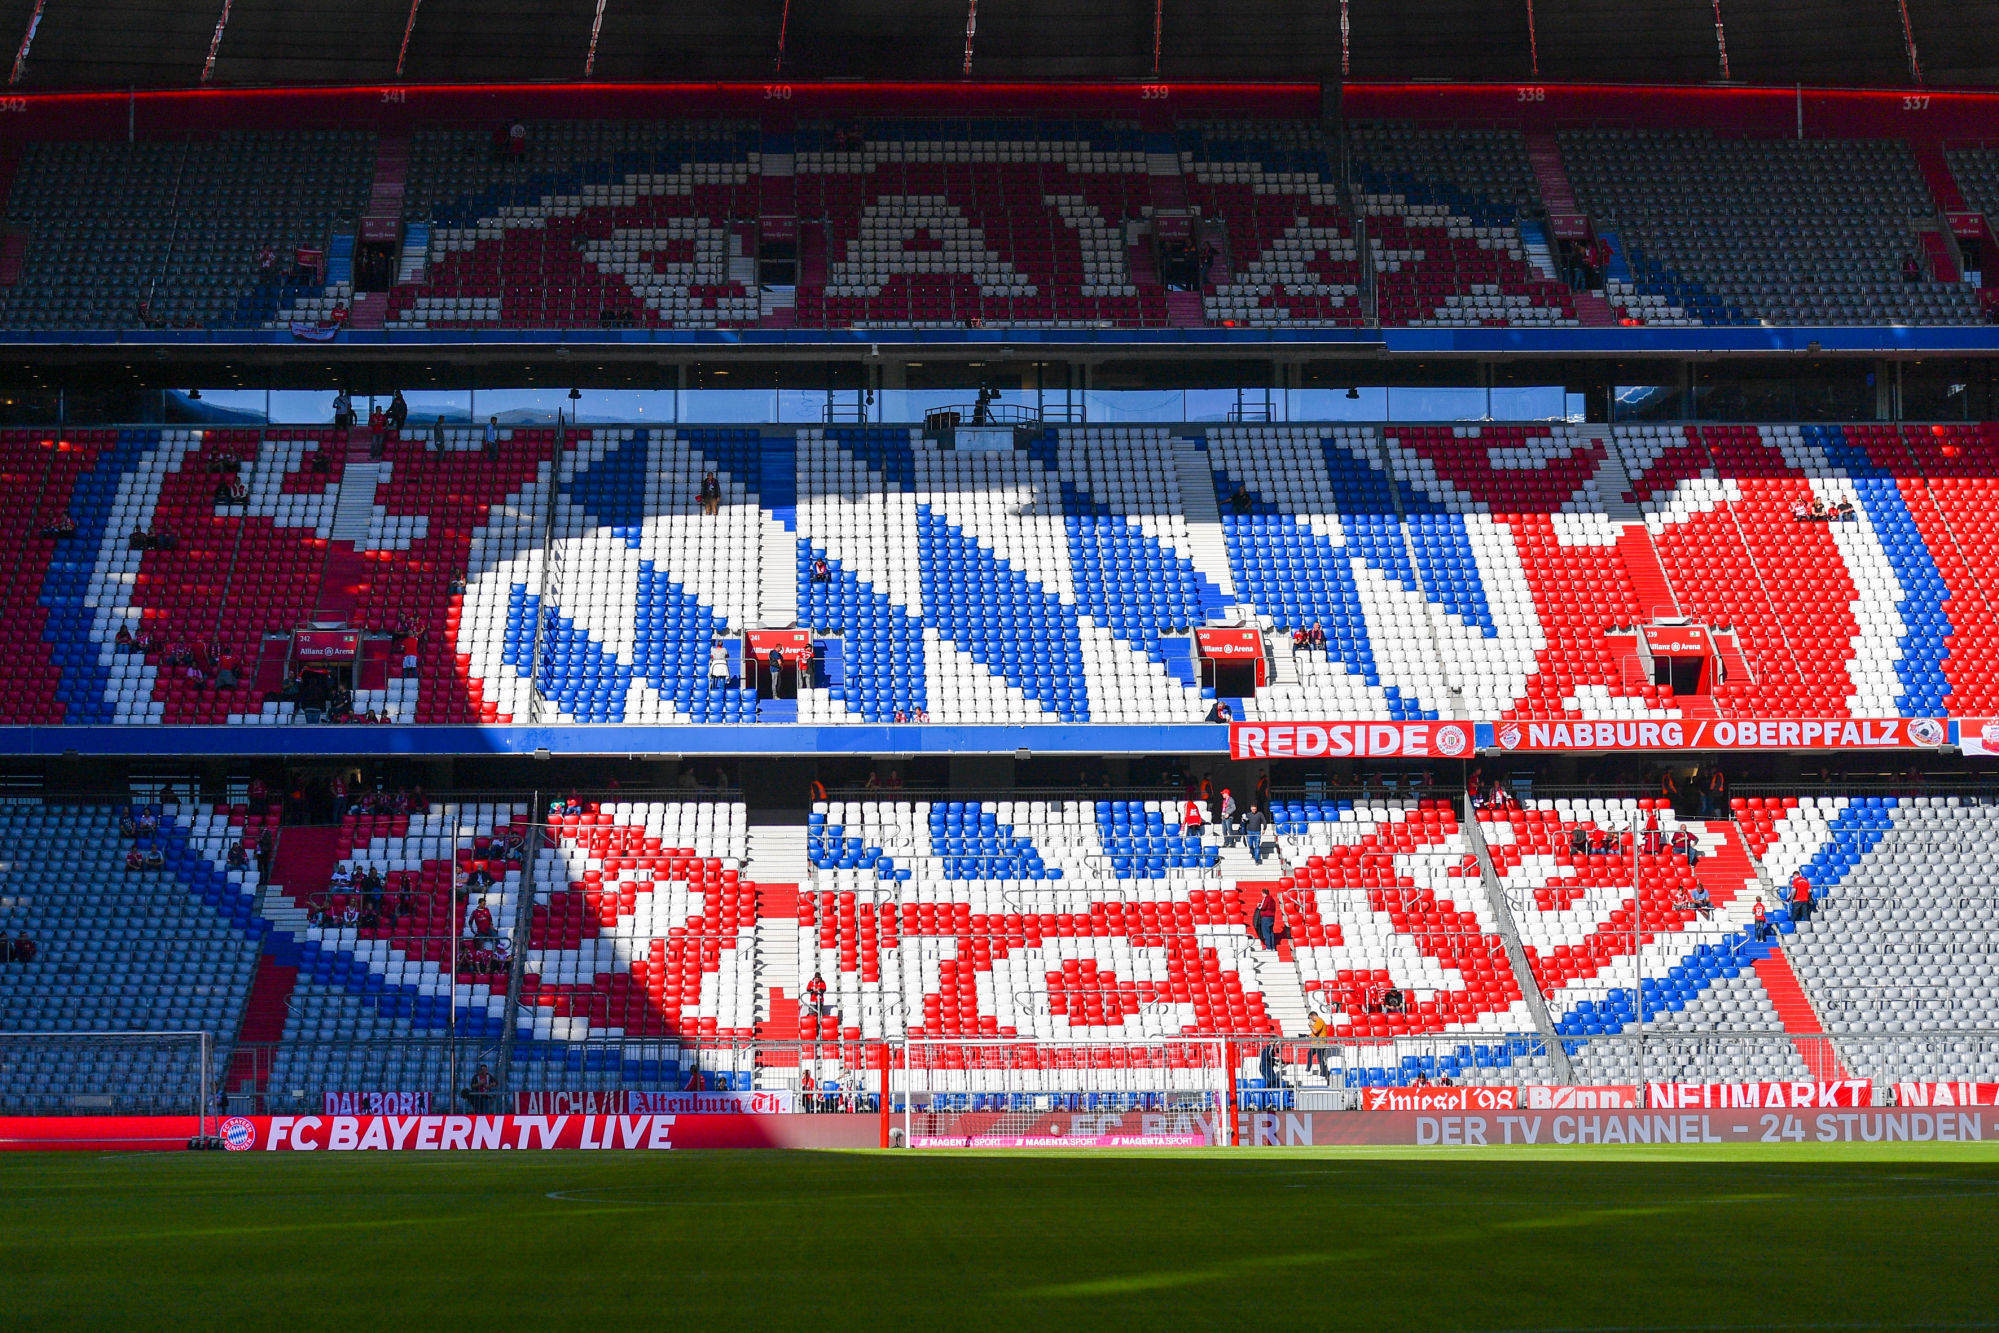 MUNICH,GERMANY,26.OCT.19 - SOCCER - 1. DFL, 1. Deutsche Bundesliga, FC Bayern Muenchen vs 1.FC Union Berlin. Image shows the FC Bayern logo at the Allianz Arena. Photo: GEPA pictures/ Ulrich Gamel - DFL regulations prohibit any use of photographs as image sequences and/or quasi-video 

Photo by Icon Sport - --- - Allianz Arena - Munich (Allemagne)